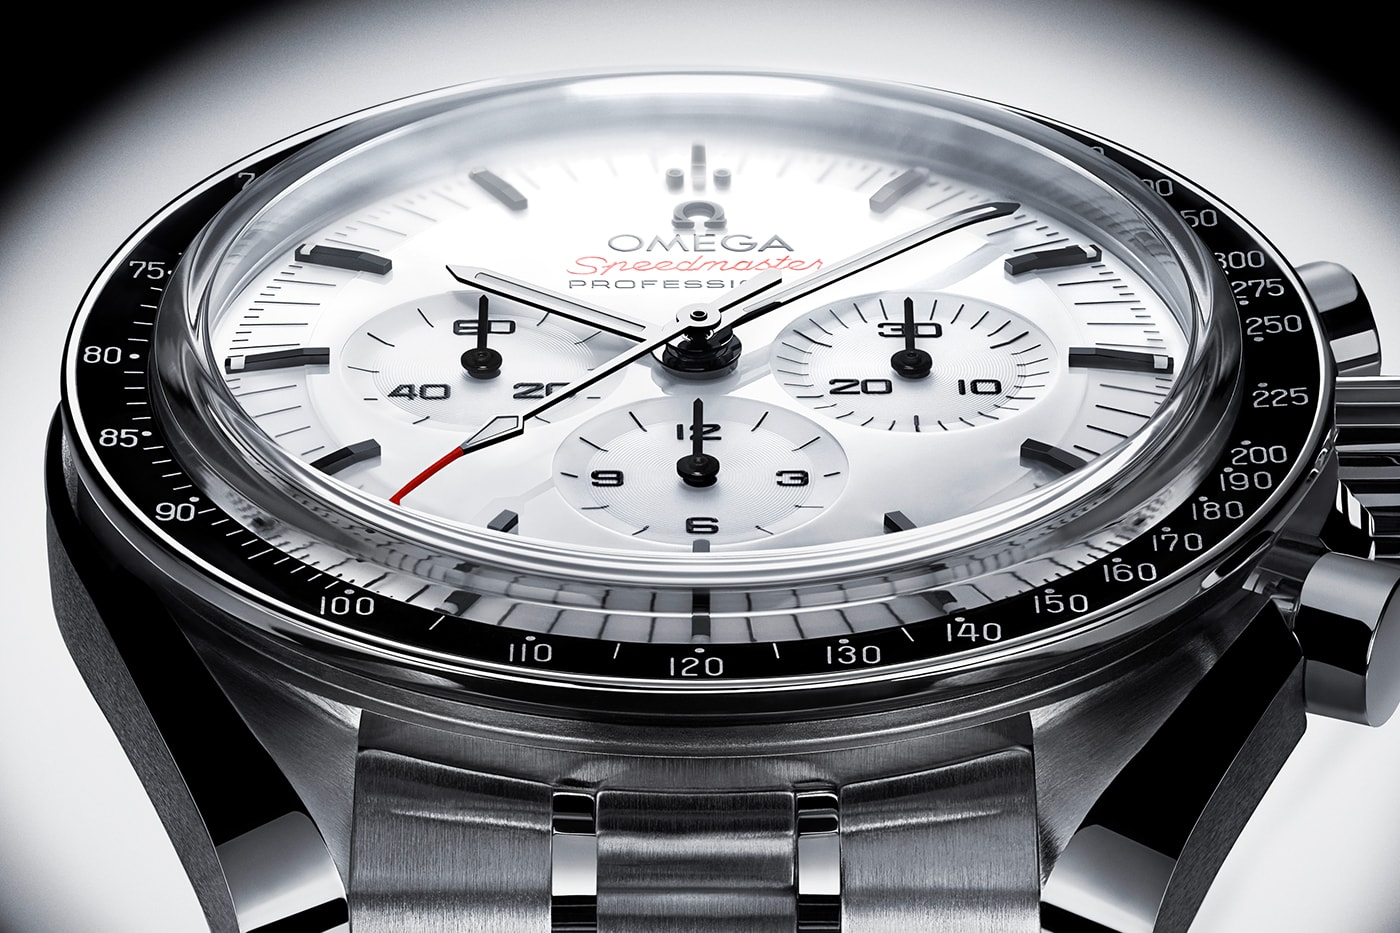 OMEGA Speedmaster Moonwatch Lacquered White Dial Release Info